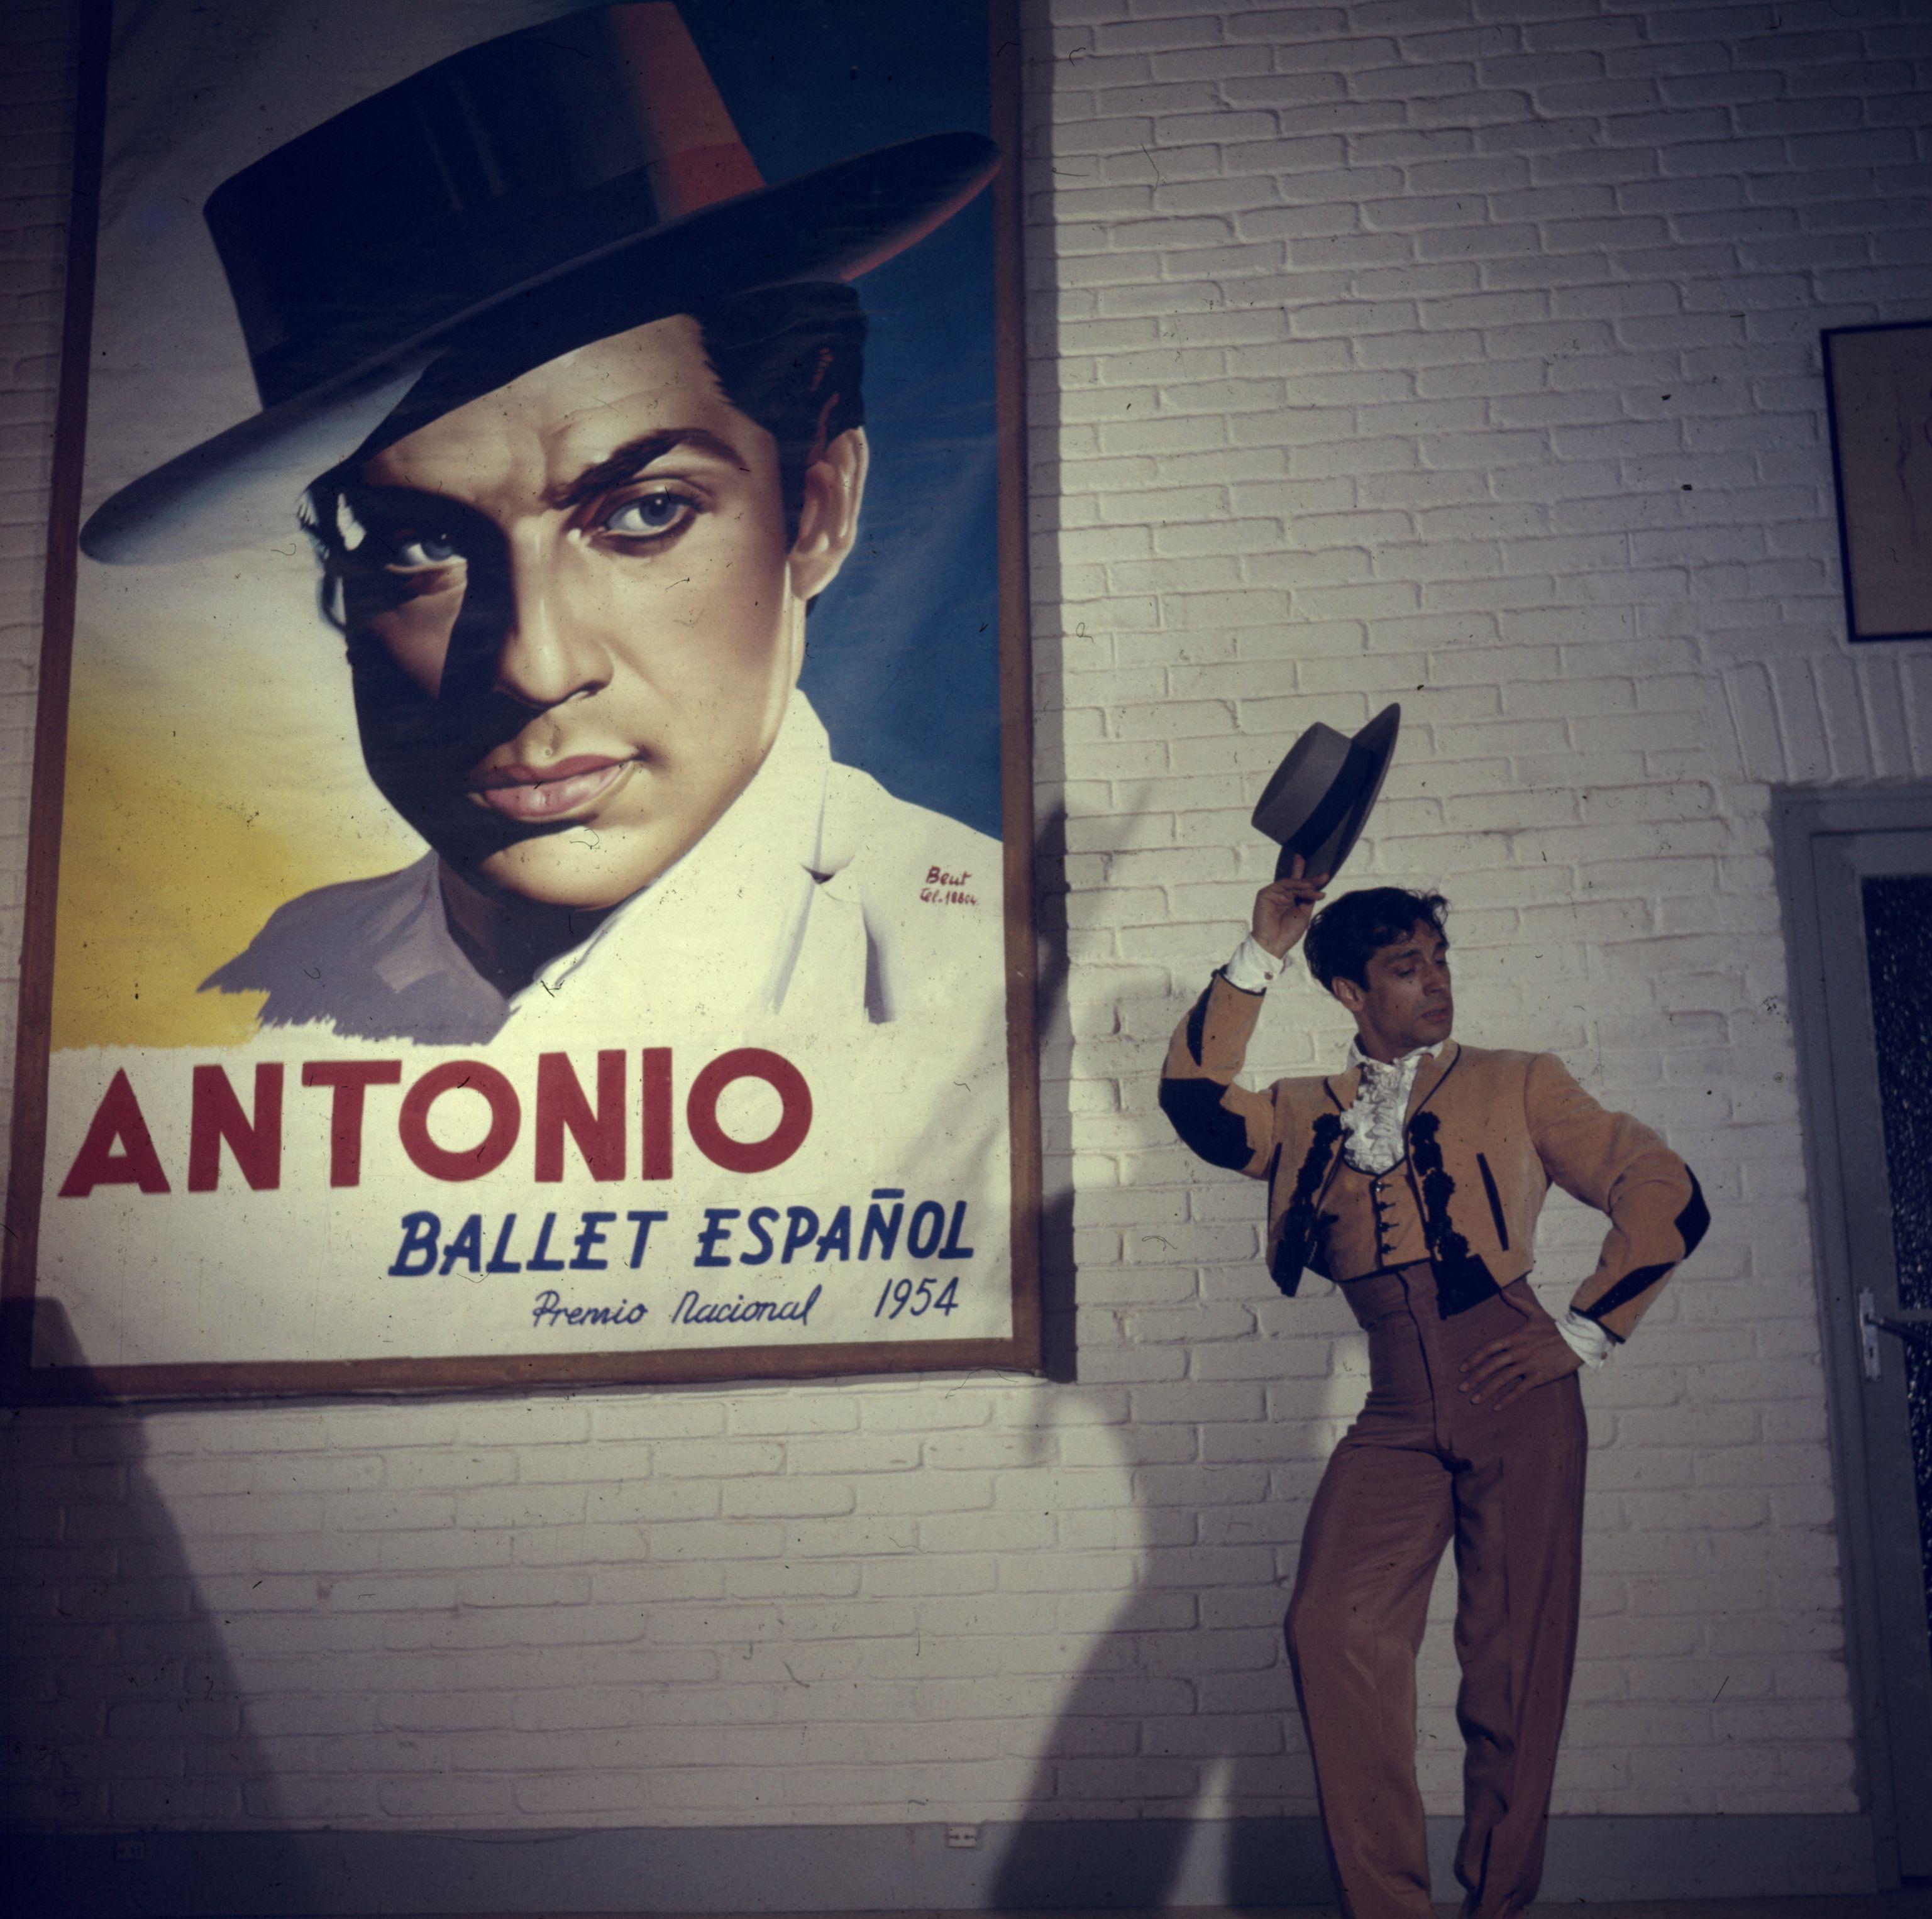 A flamenco dancer raises his hat in front of a poster advertising the virtuoso dancer Antonio (Antonio Ruiz Soler) in the national premiere of 'Ballet Espanol'. (Photo by Slim Aarons/Getty Images)

Slim Aarons
Antonio Ruiz Soler
Chromogenic Lambda